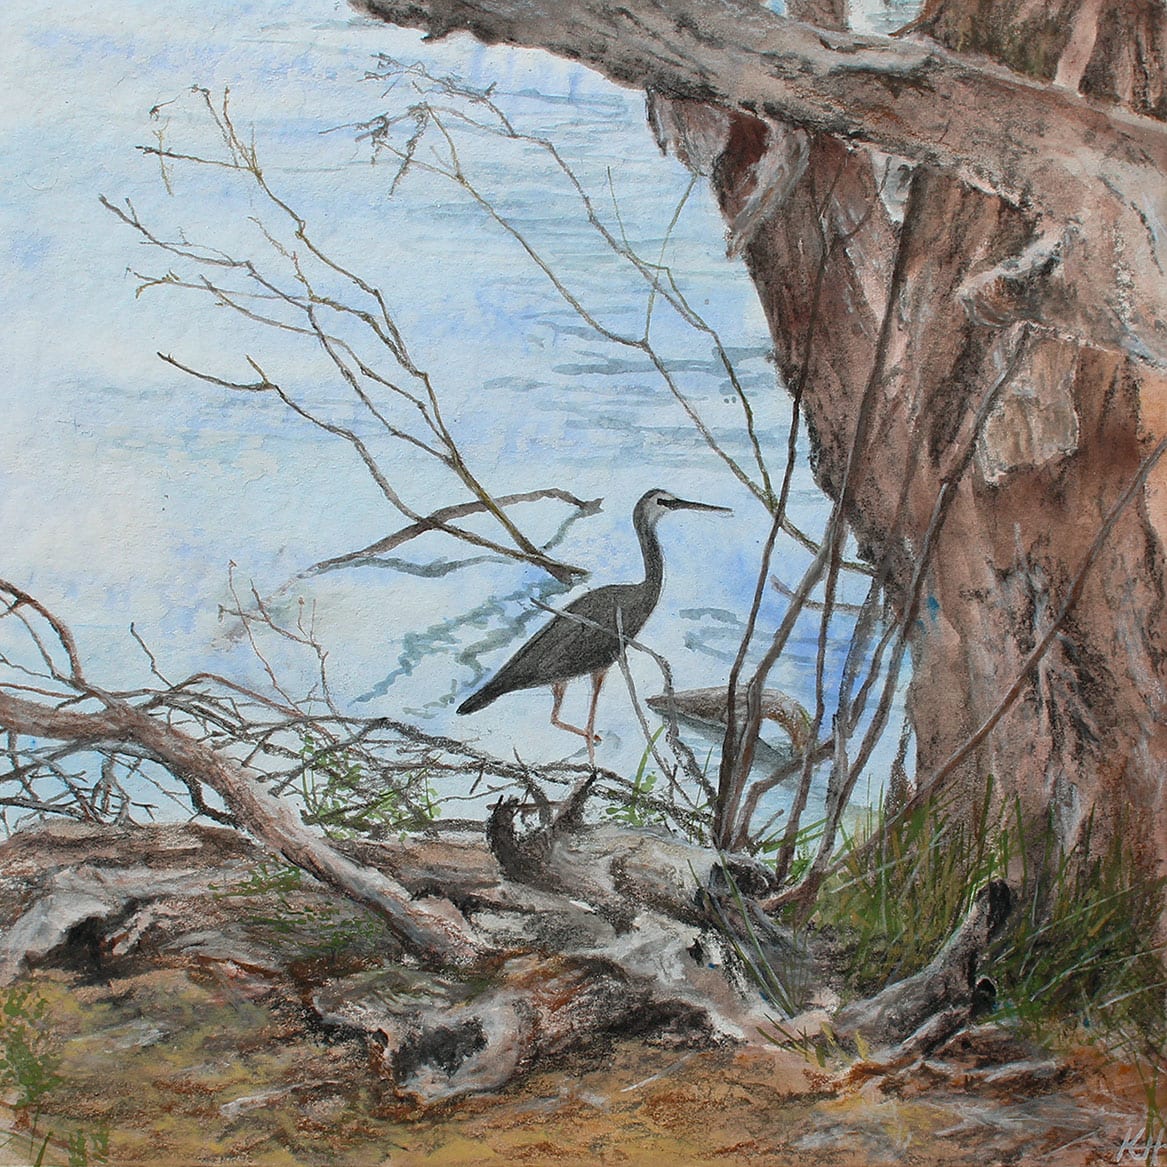 White Faced Heron by the Lakeside II by Kirsten Hocking  Image: "White Faced Heron by the Lakeside I", original painting by Kirsten Hocking, mixed media on cotton paper, 25cm x 25cm (unframed), 2024